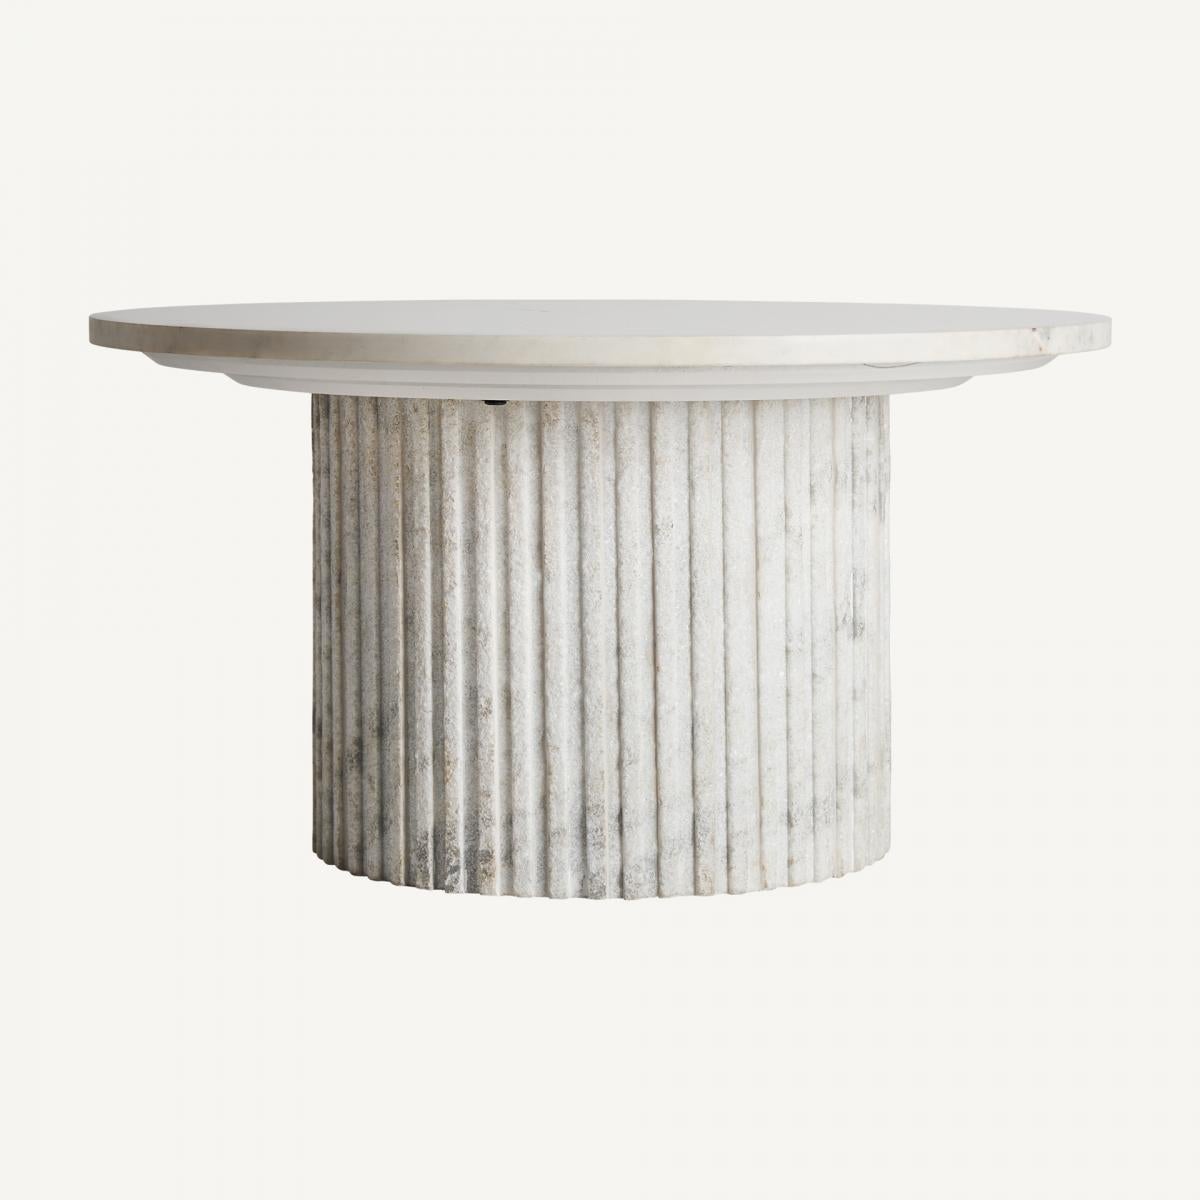 This coffee table set captures the essence of the Art Deco era while paying homage to the architectural splendor of ancient Rome, resulting in a piece that blends history, art, and functionality seamlessly. The centerpiece of the set is a coffee